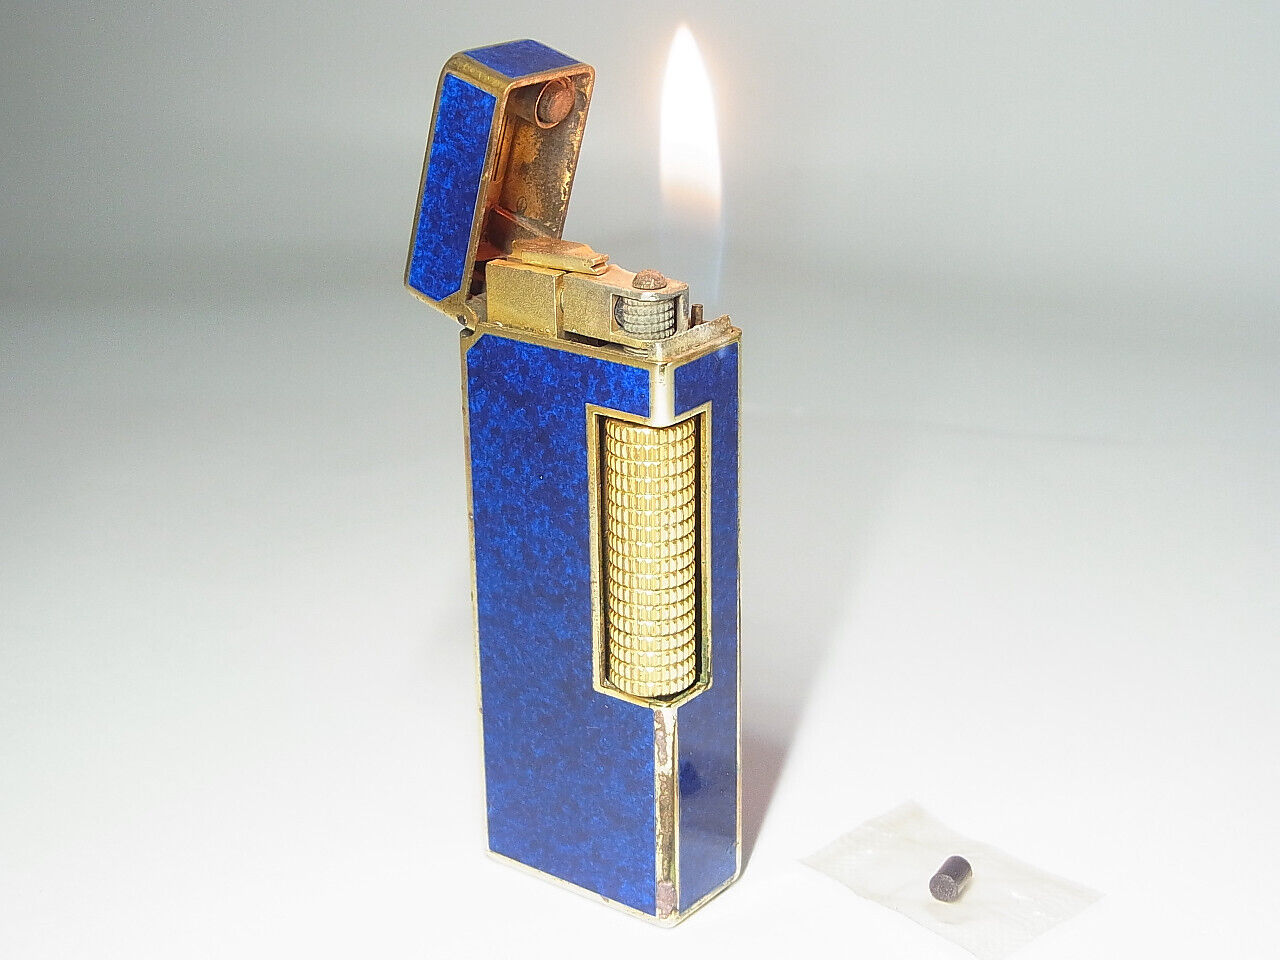 Dunhill Rollagas Lighter Lapis Lazuli Blue Lacquer With flint All Working (910